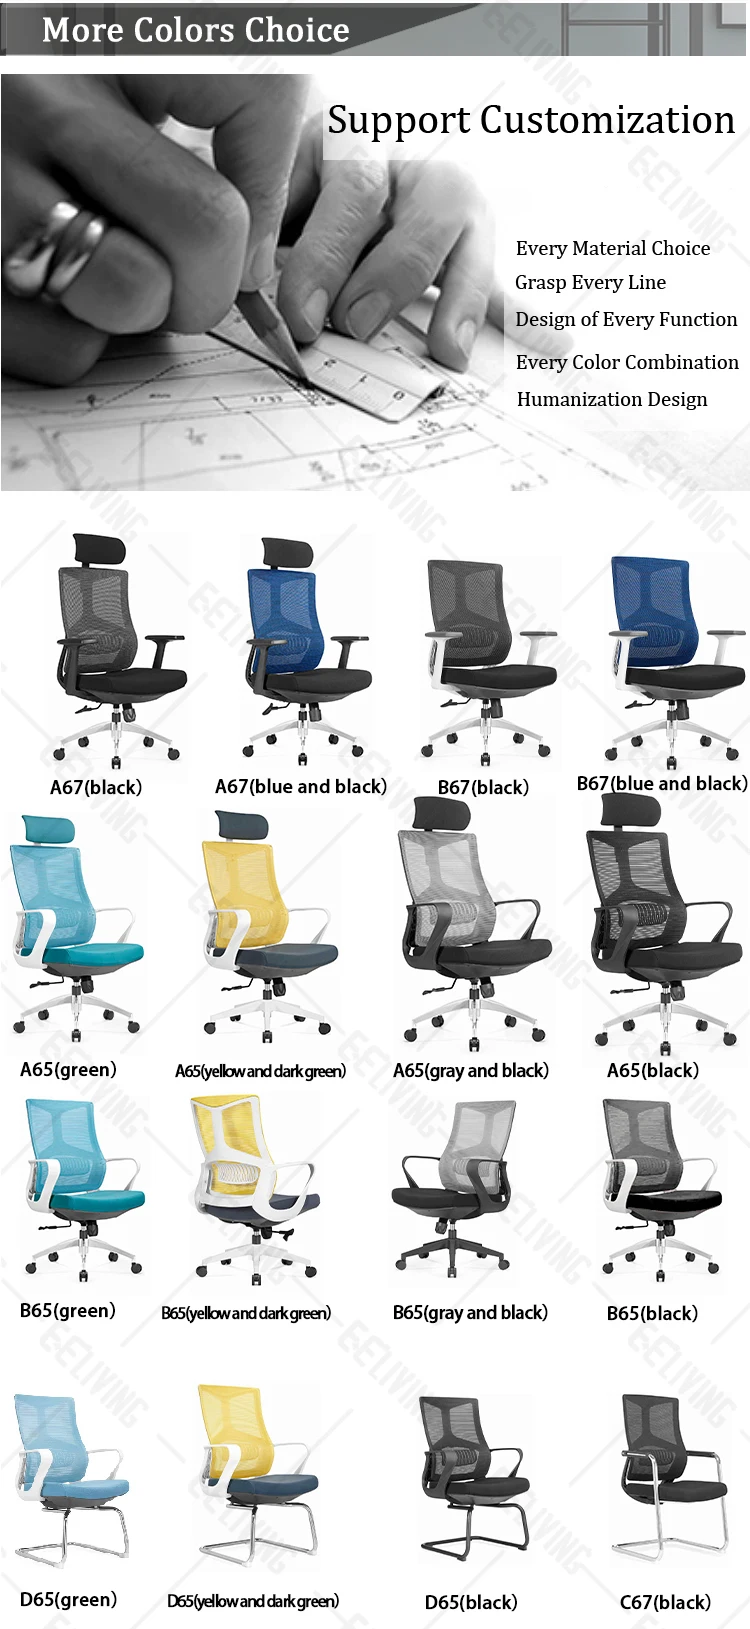 Silla Oficina Furniture Commercial Furniture Mesh Material Computer Desk Manager Office Chairs